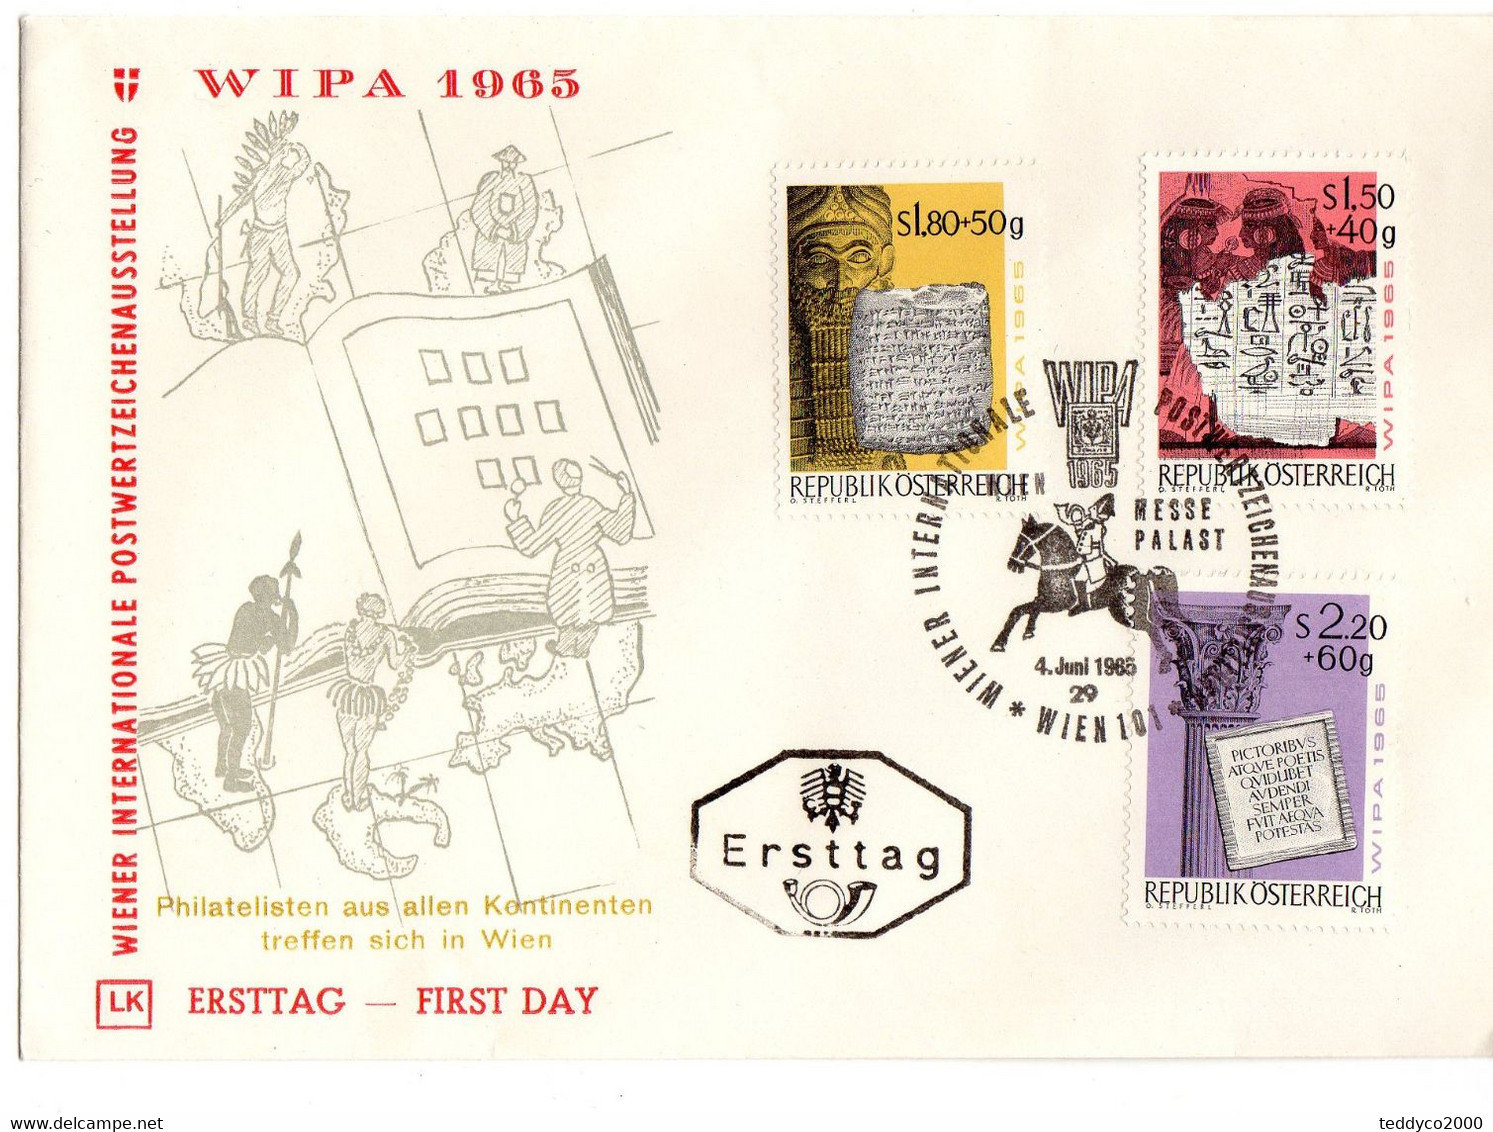 OSTERREICH WIPA 1965 Fdc - Covers & Documents